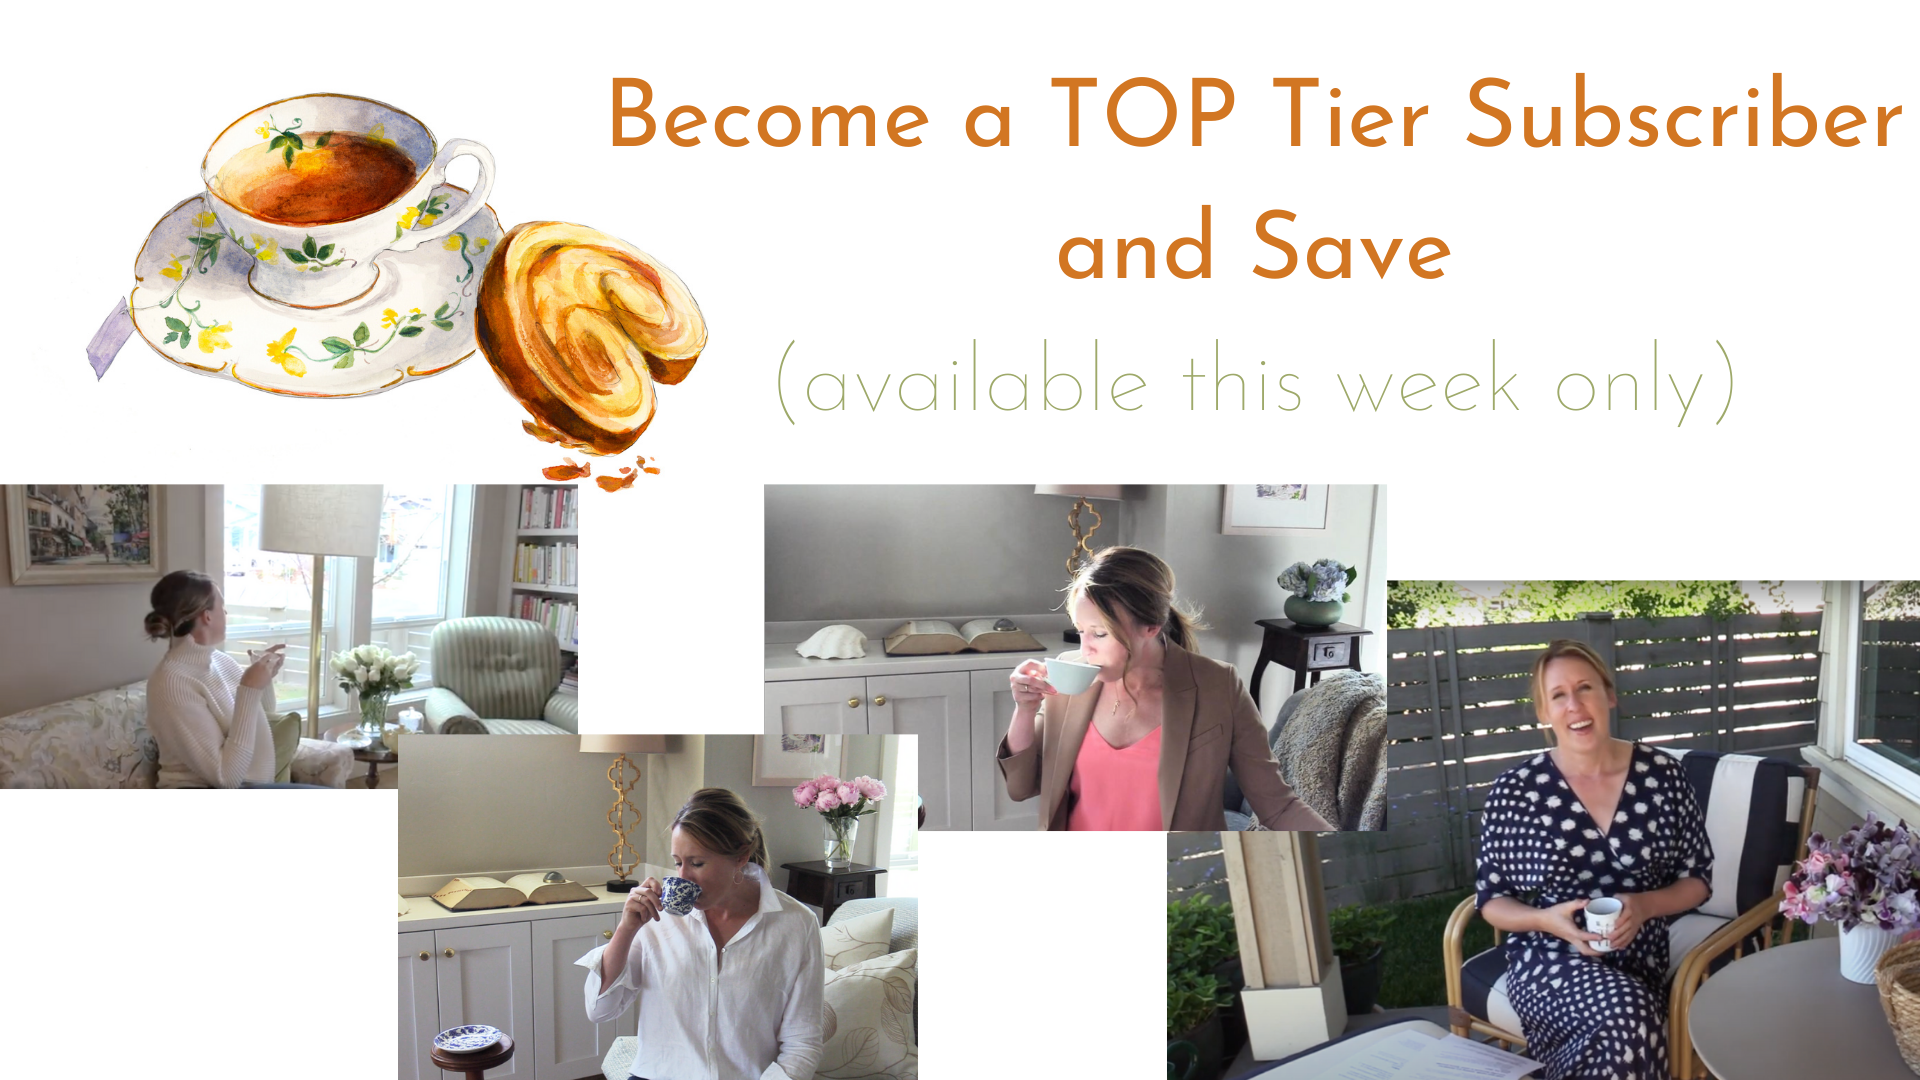 Once-A-Year Savings: Become a TOP Tier Subscriber, this week only and save